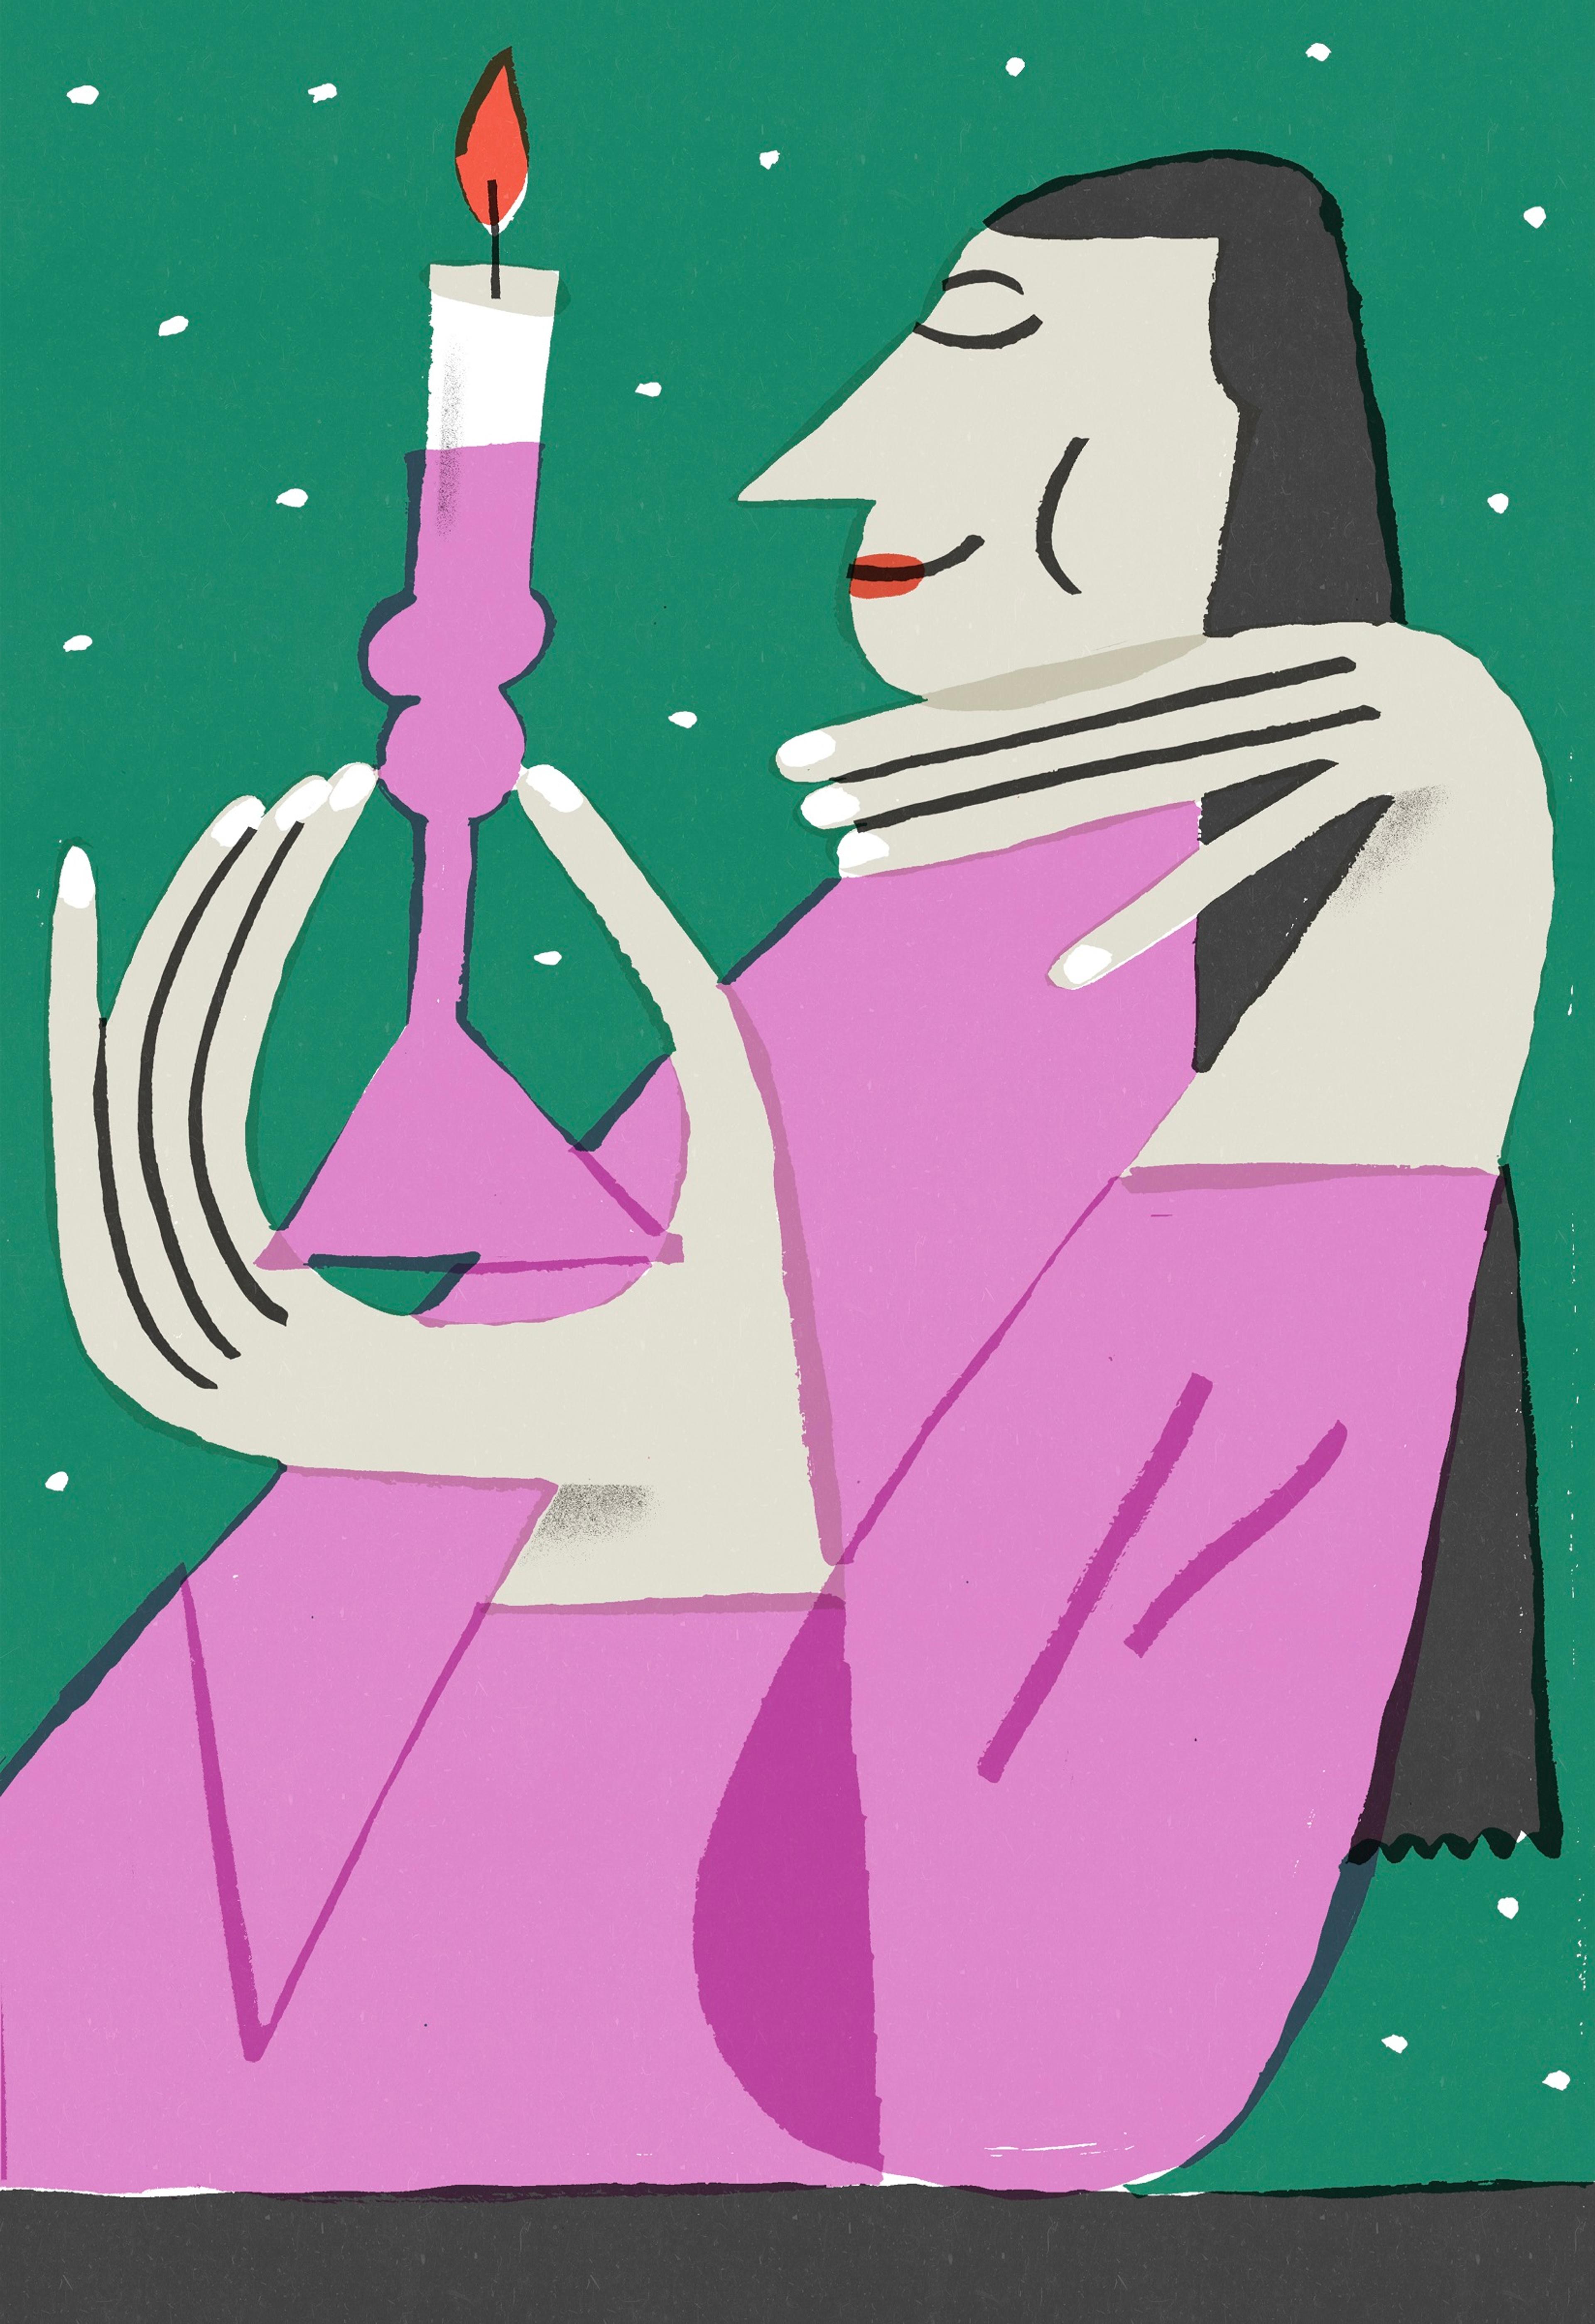 Illustration of a person in a pink top holding a candle against a spotted green background